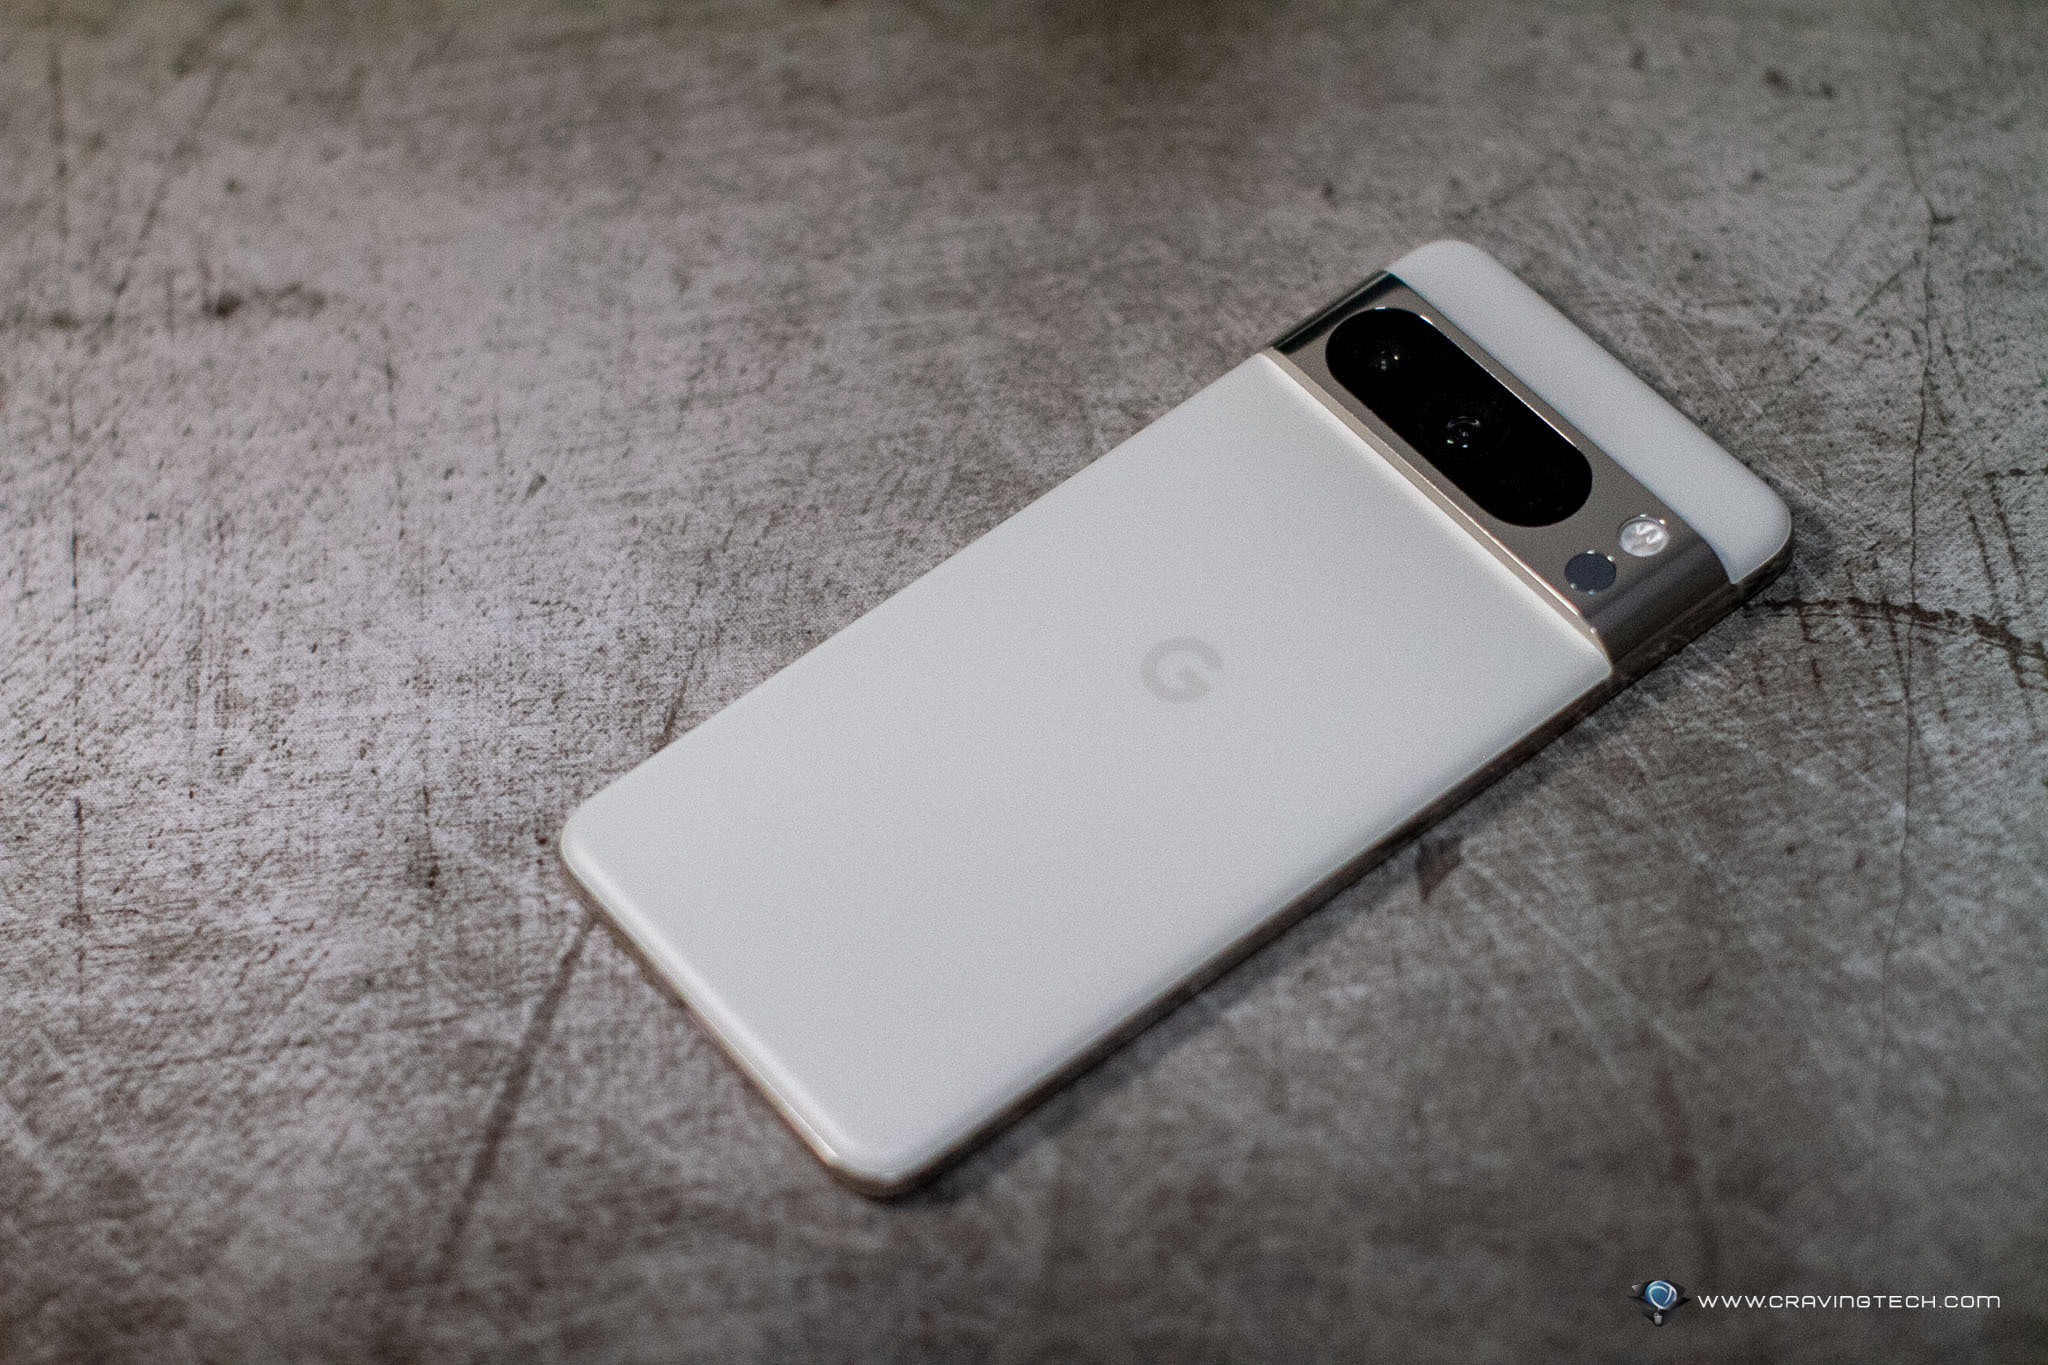 Google Pixel 8 Pro is now the first smartphone with built-in AI and also the first phone running Google’s Gemini Nano